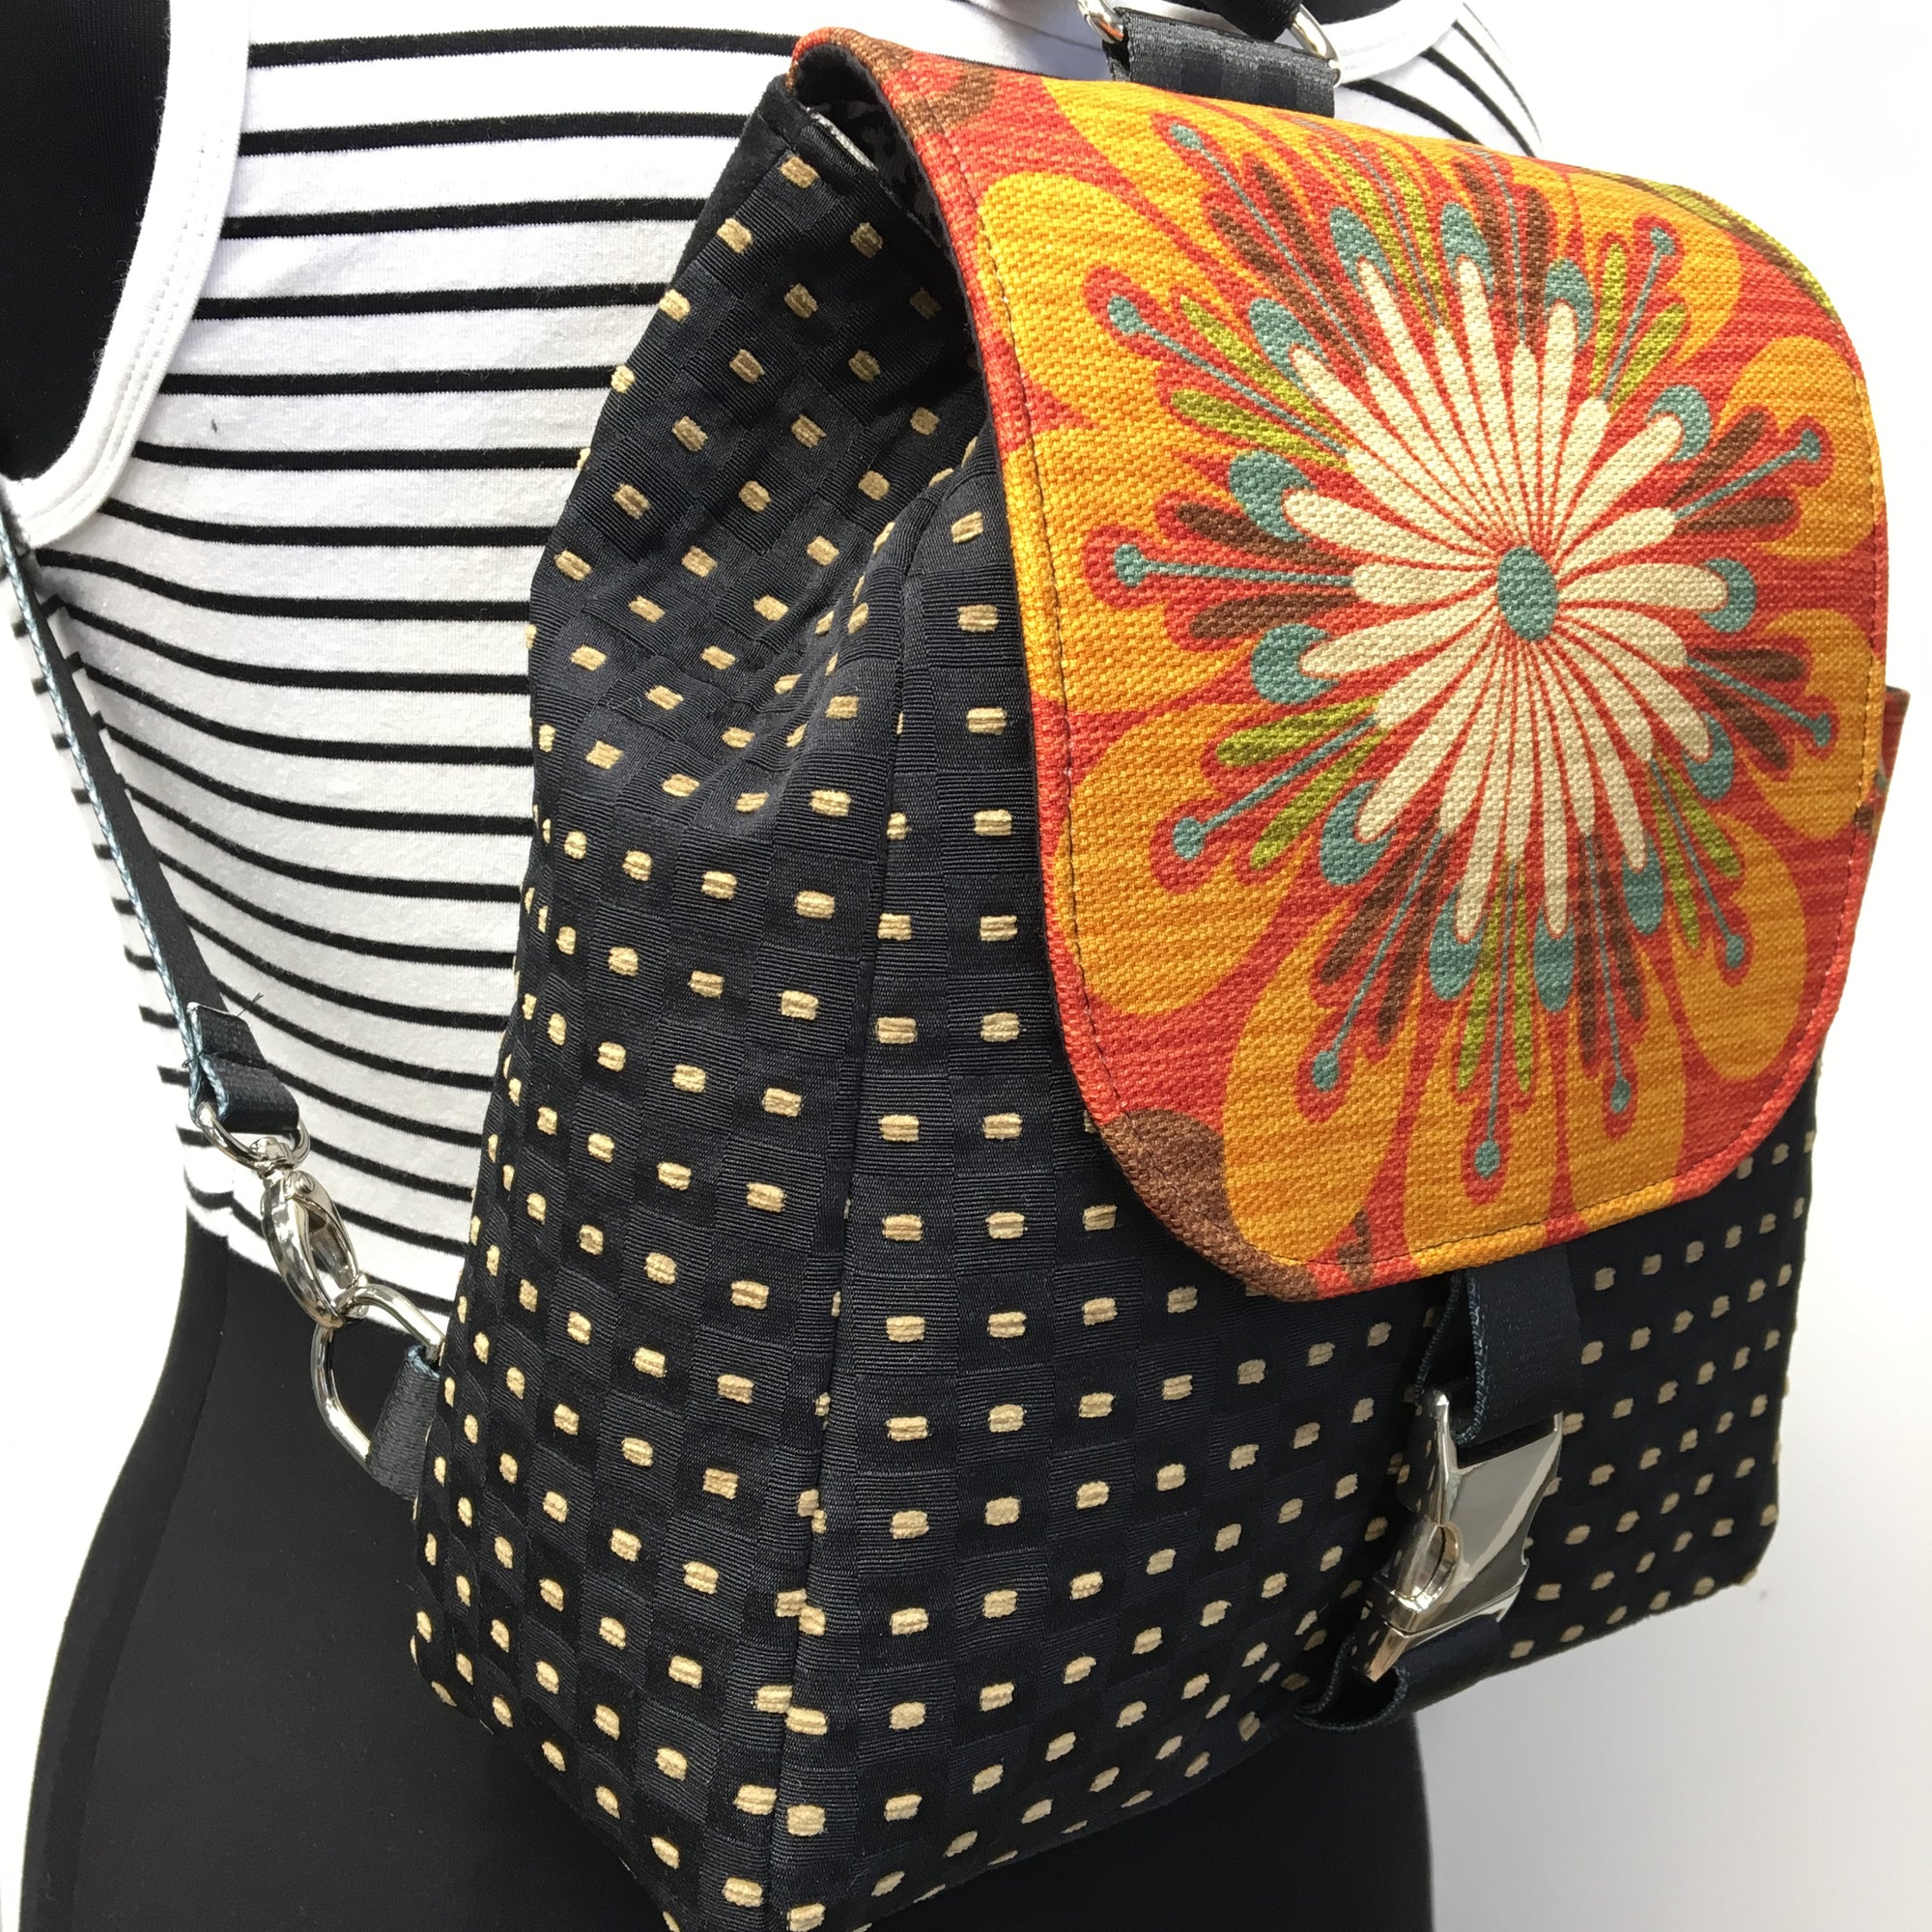 Backpack Red/Multi-color Urban Blossom